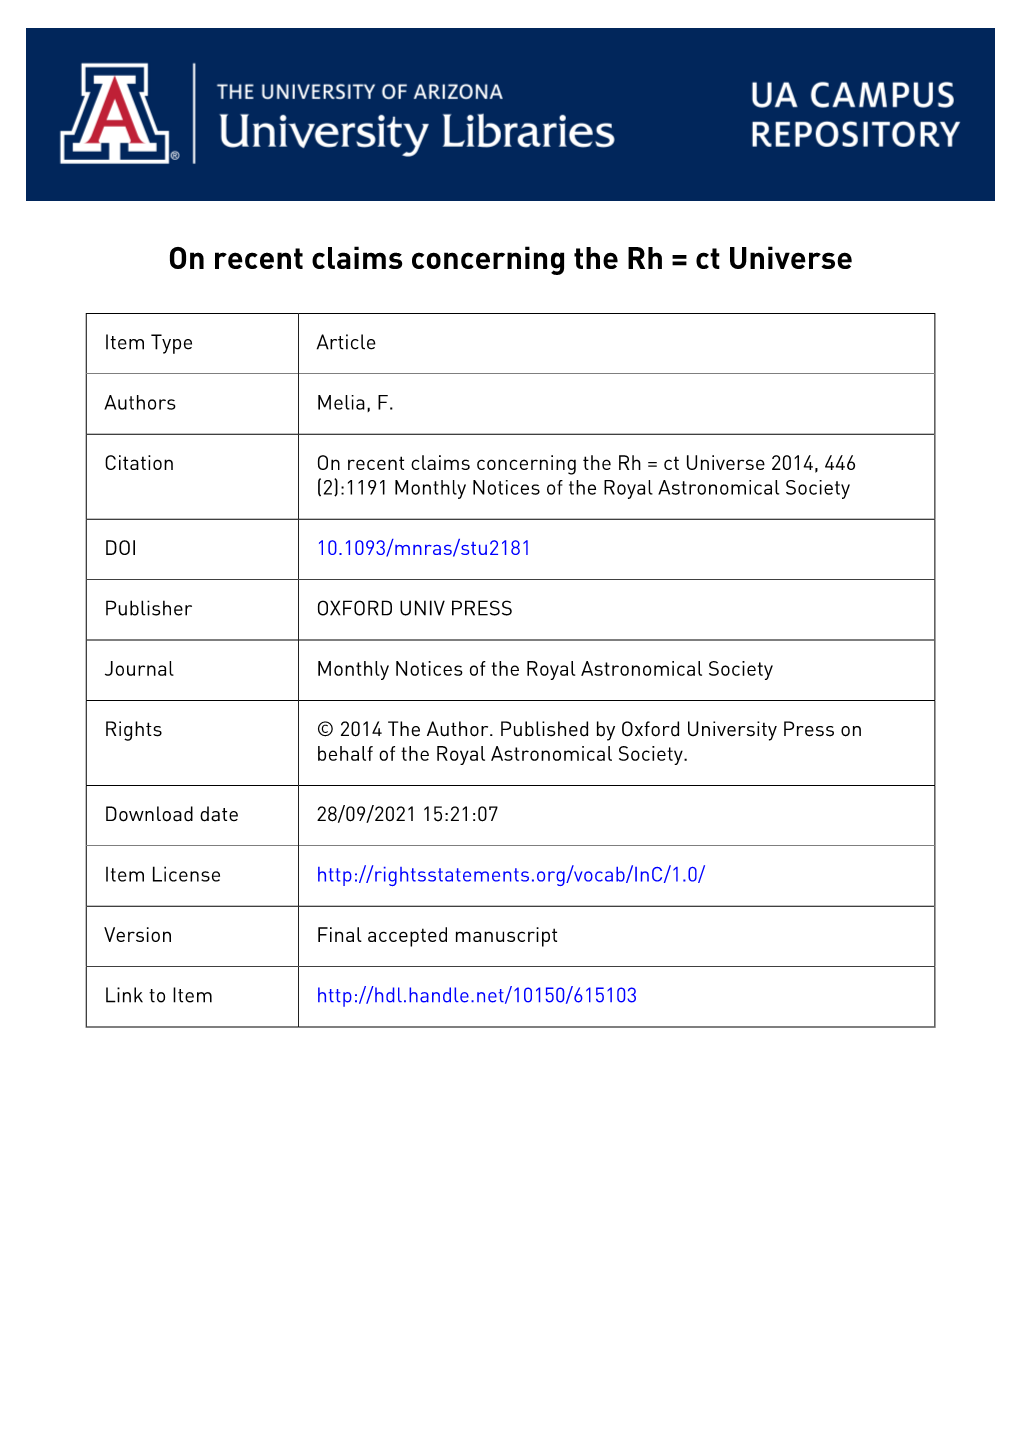 On Recent Claims Concerning the Rh = Ct Universe